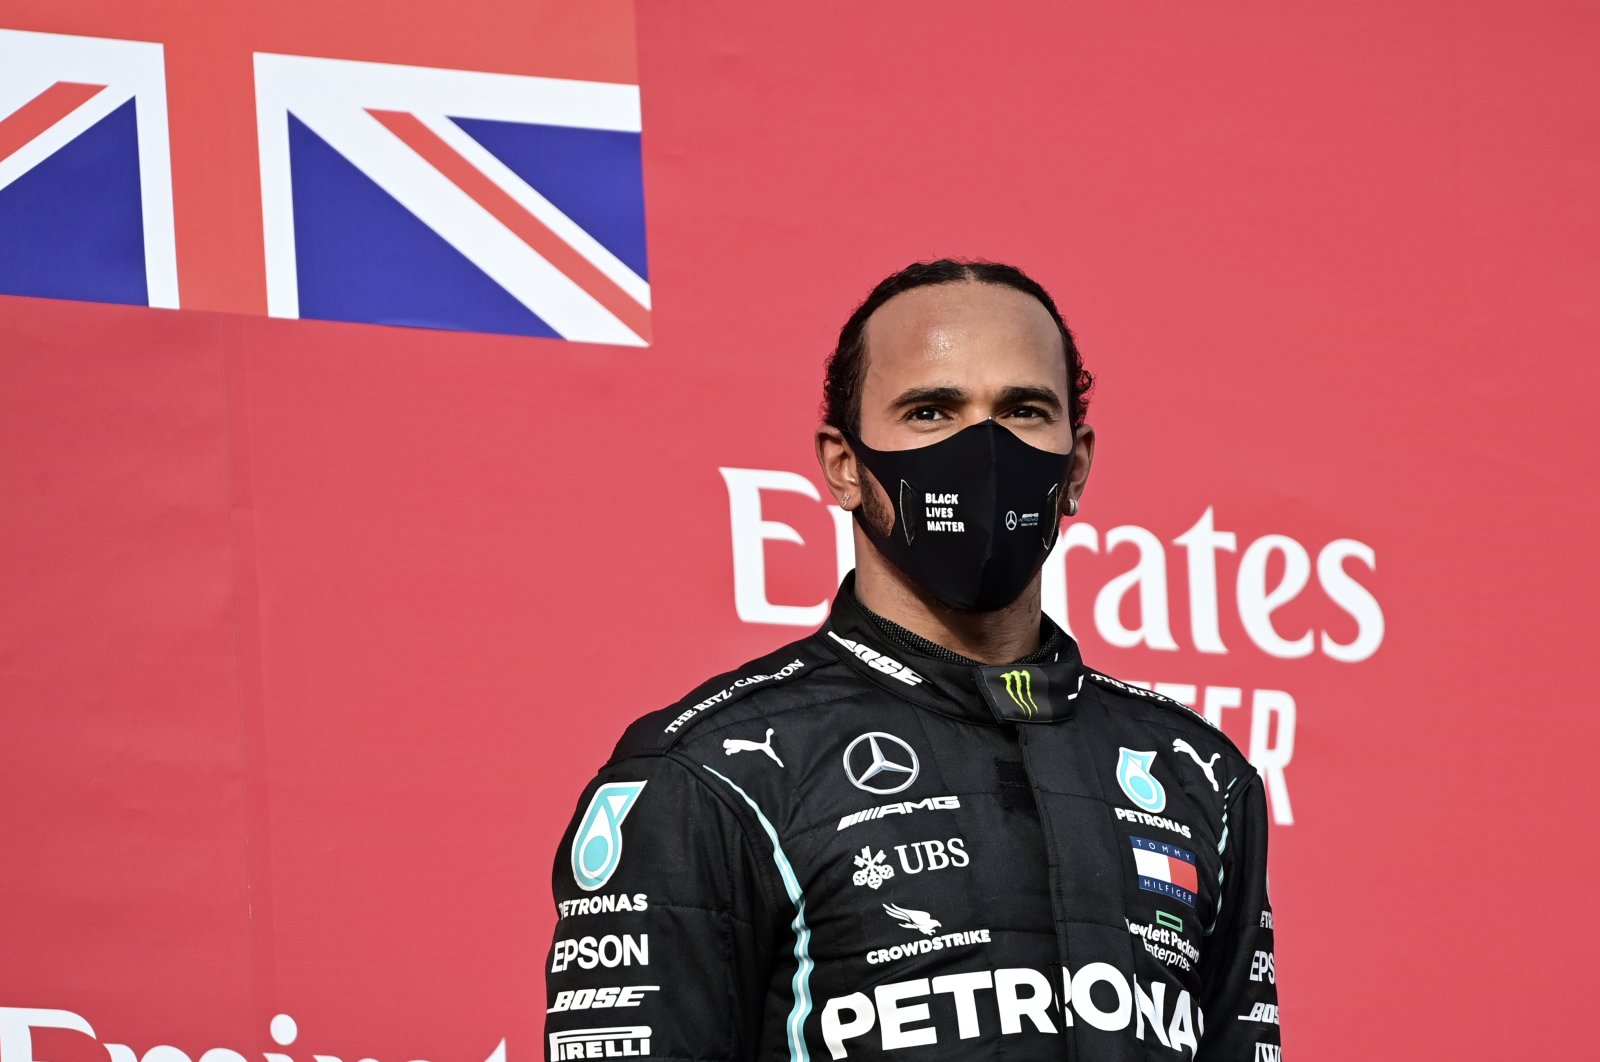 Mercedes driver Lewis Hamilton stands on the podium after winning the F1 Emilia Romagna GP, in Imola, Italy, Nov.1, 2020. (AP Photo)